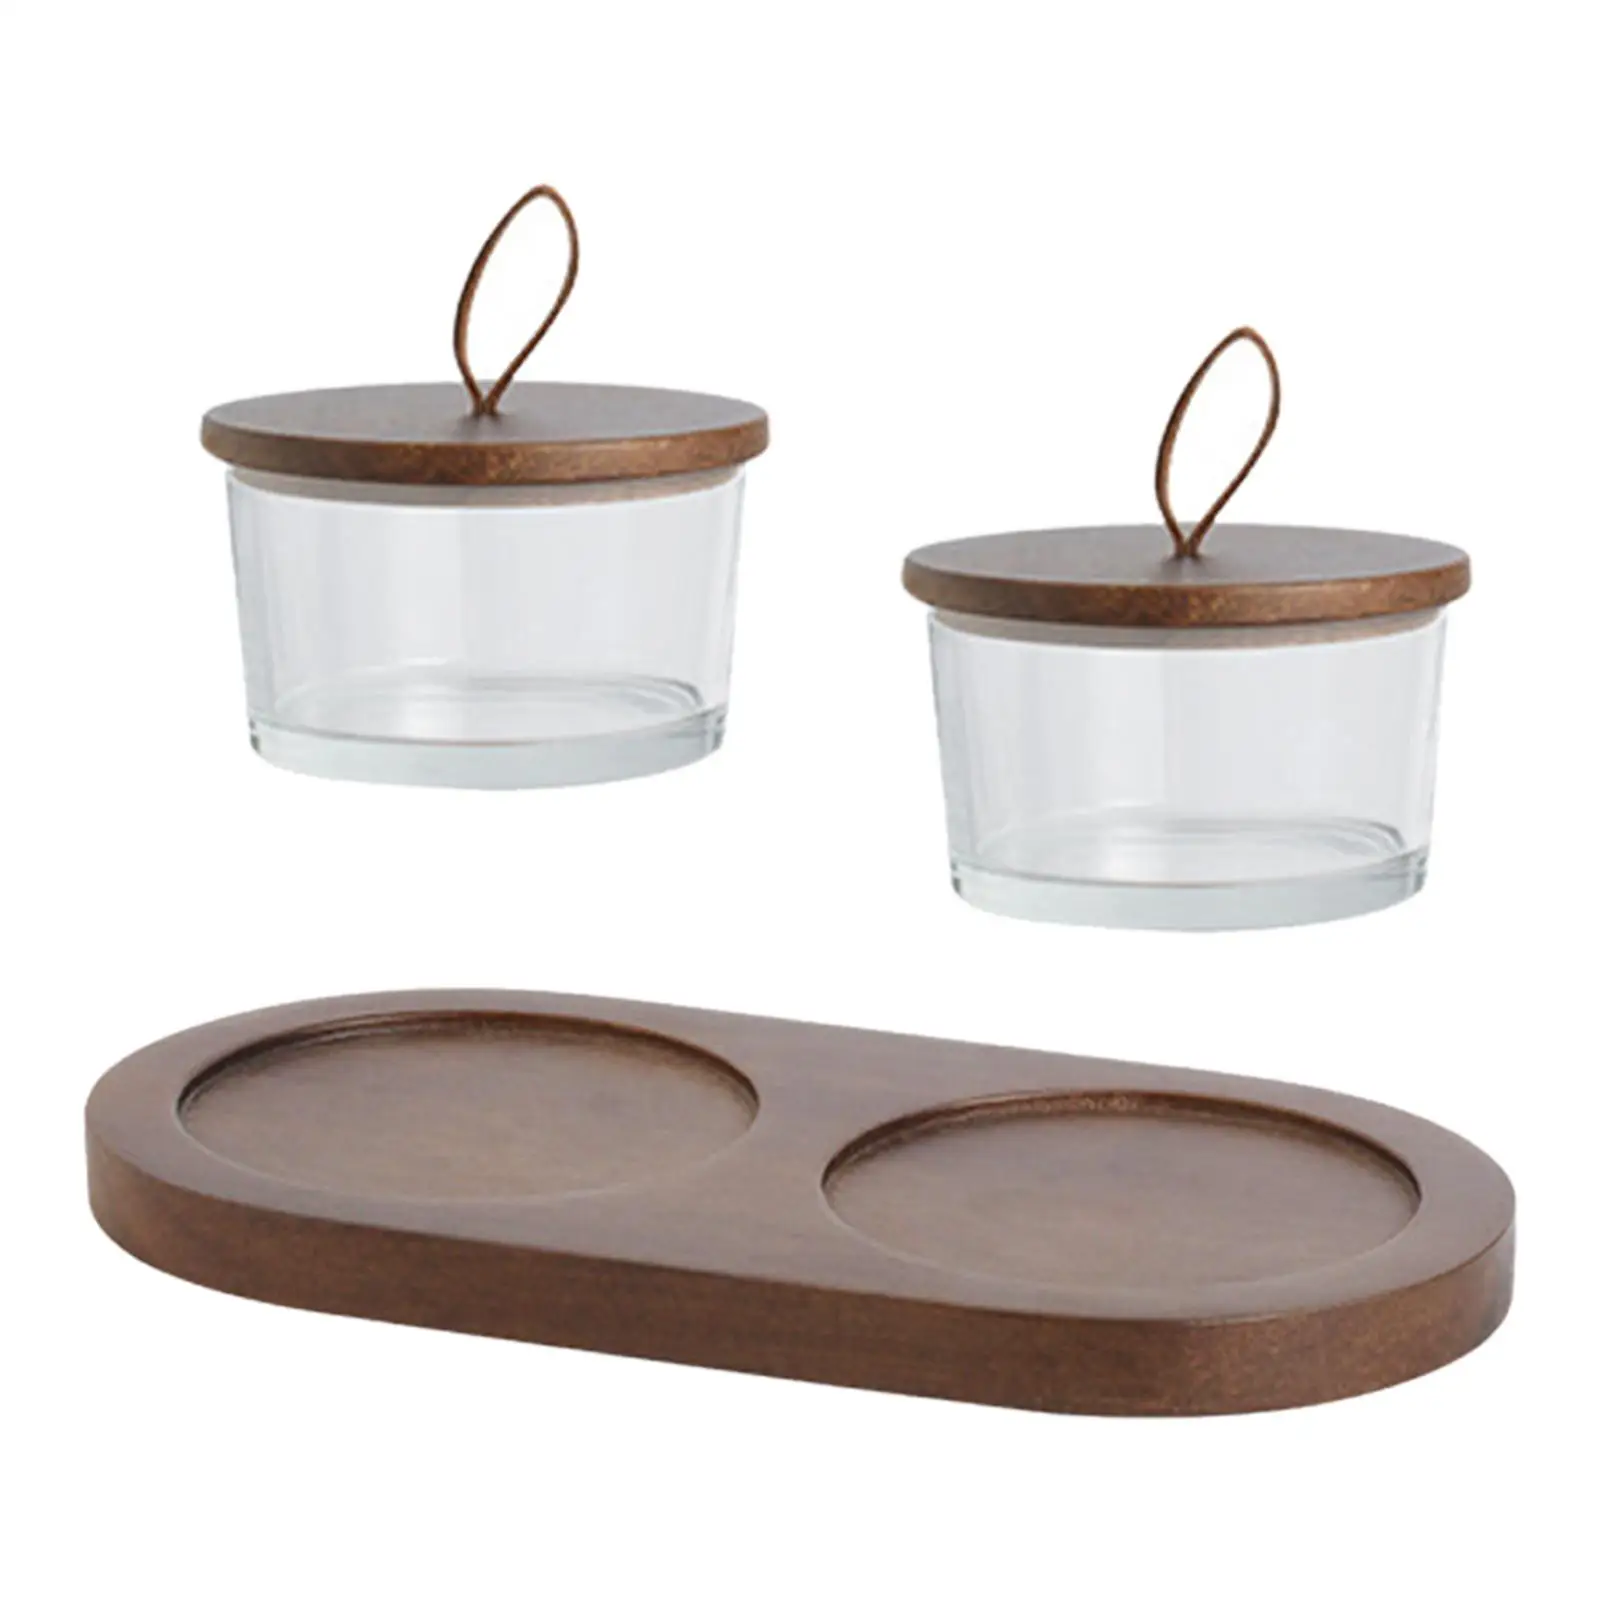 Bowl with Wooden Serving Tray, Glass Bowls with Lid Serving Dishes for